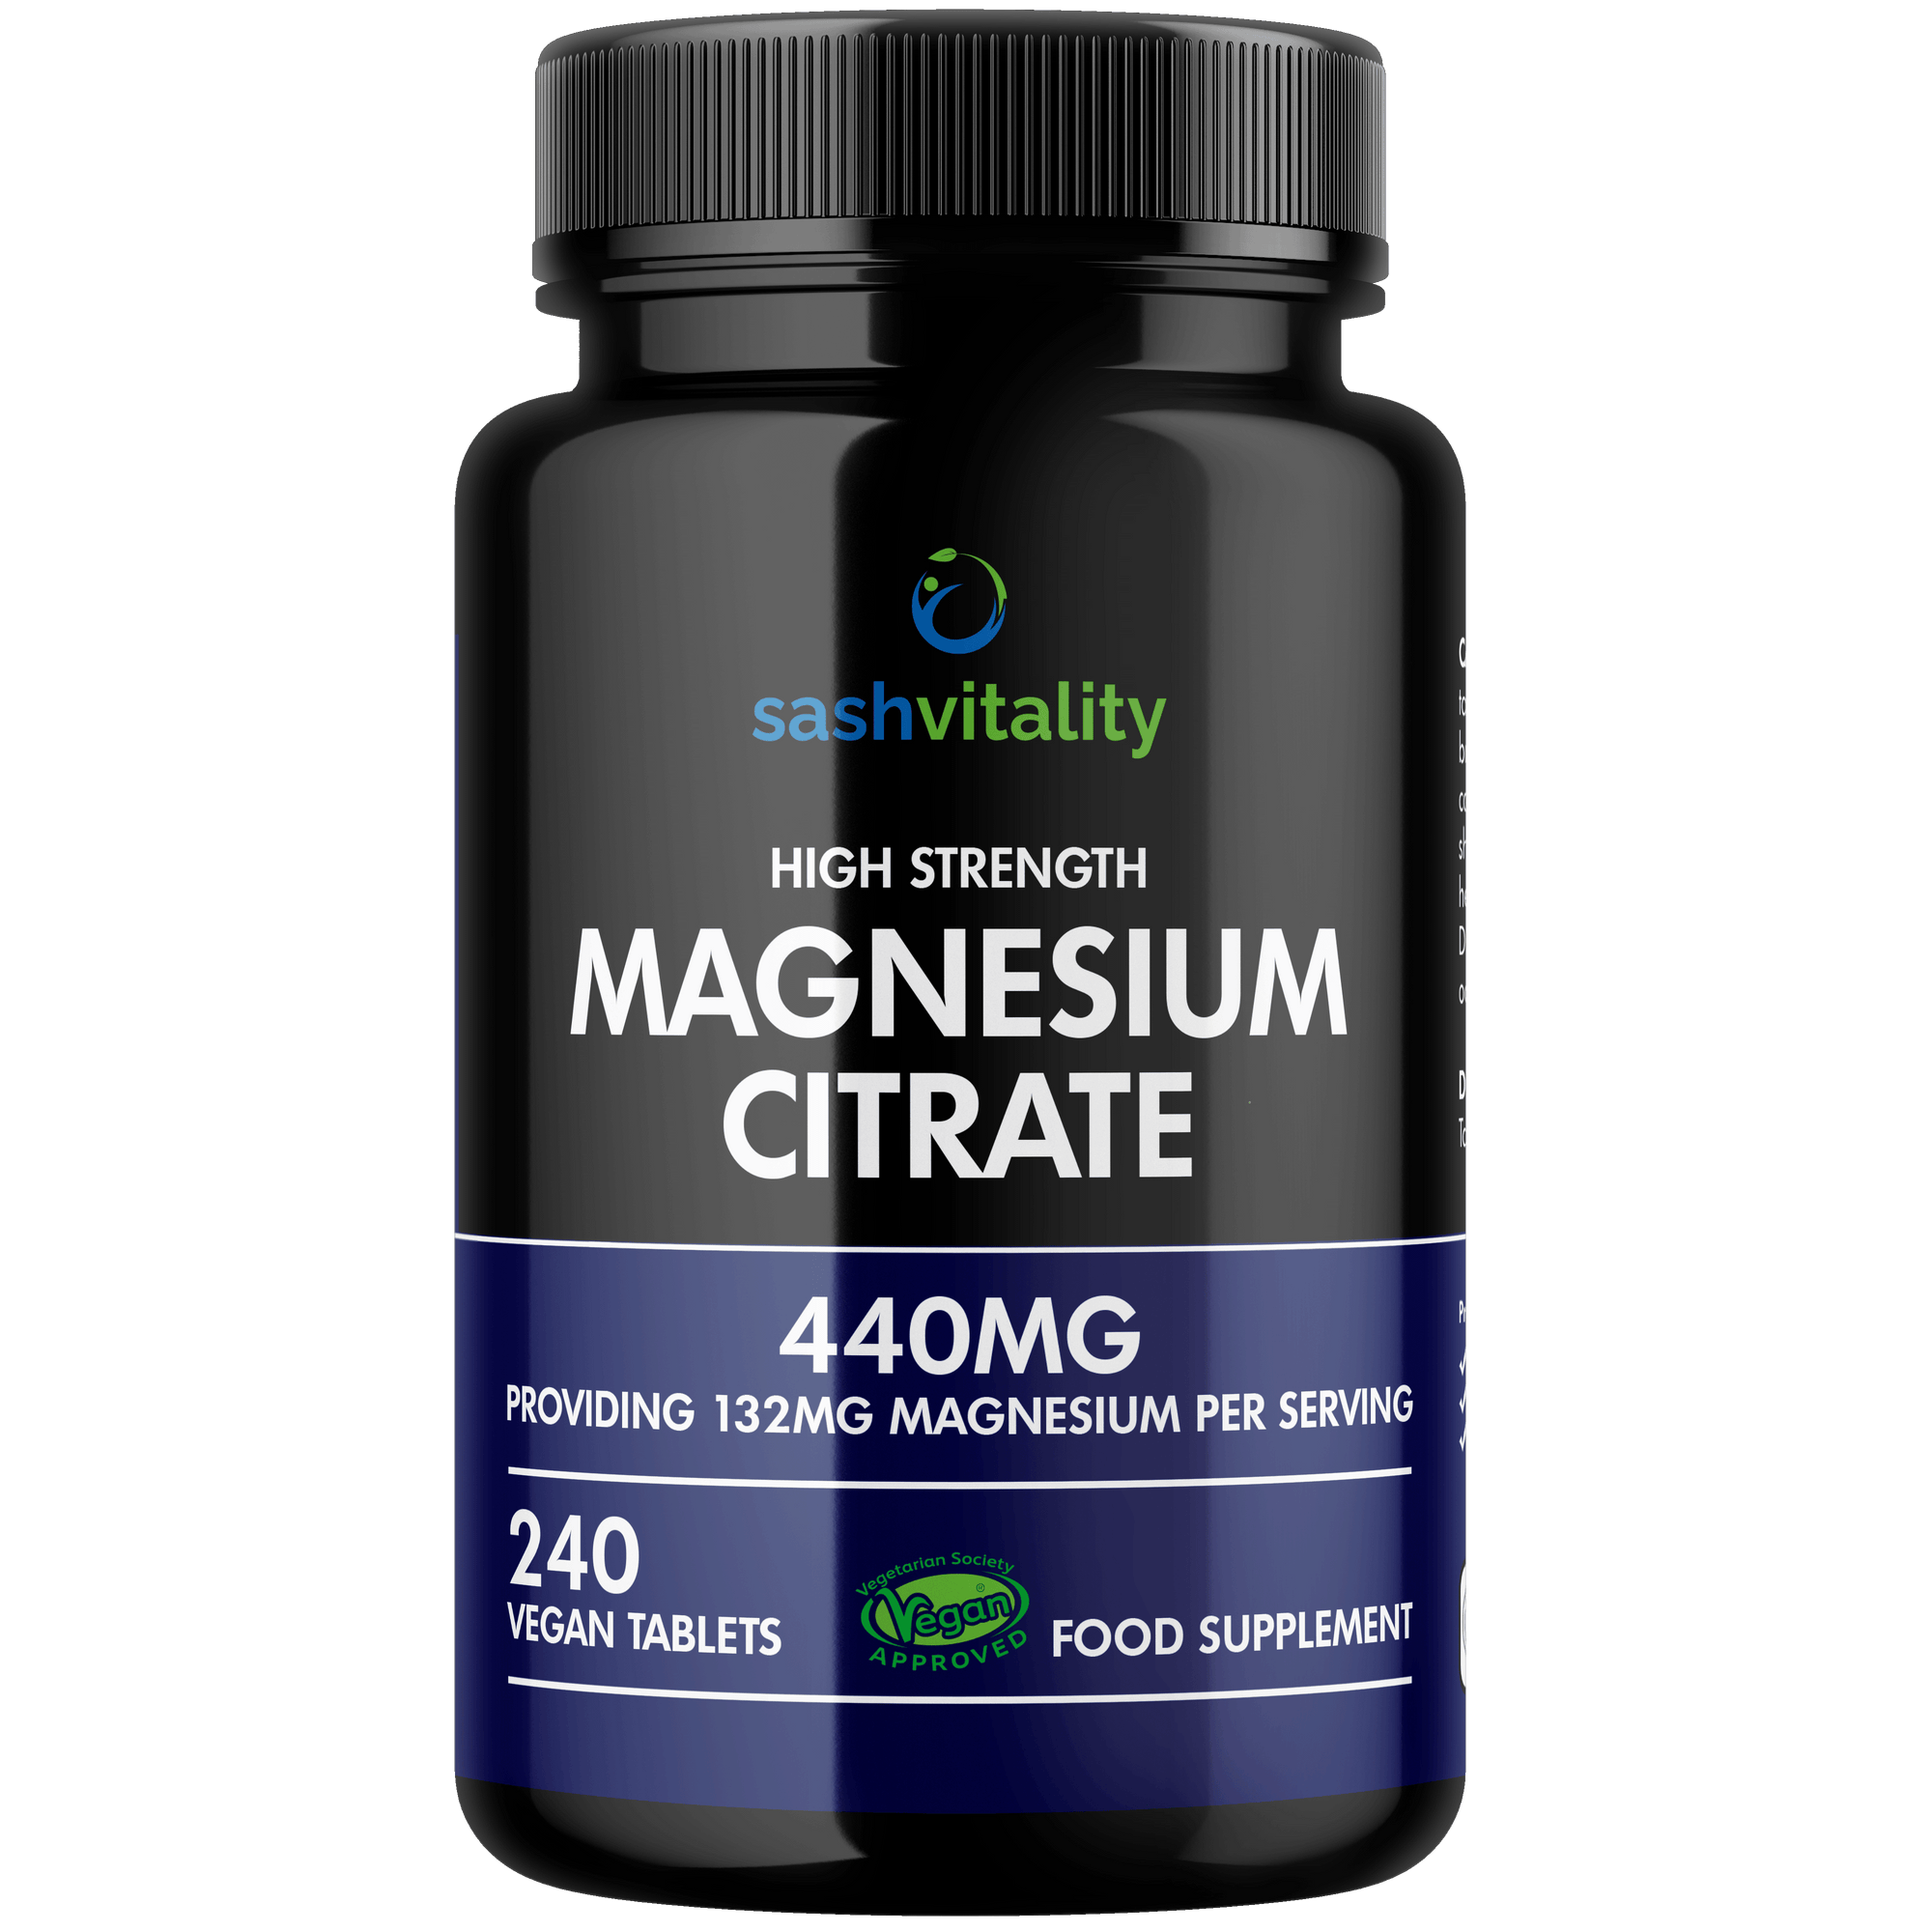 Magnesium Citrate - 240 High Strength Vegan Tablets (4 Months Supply) – Magnesium Supporting Restless Leg Syndrome Relief (RLS) & Leg Cramps - 440mg Elemental Magnesium Per Serving – UK Made - Expiry 7/23